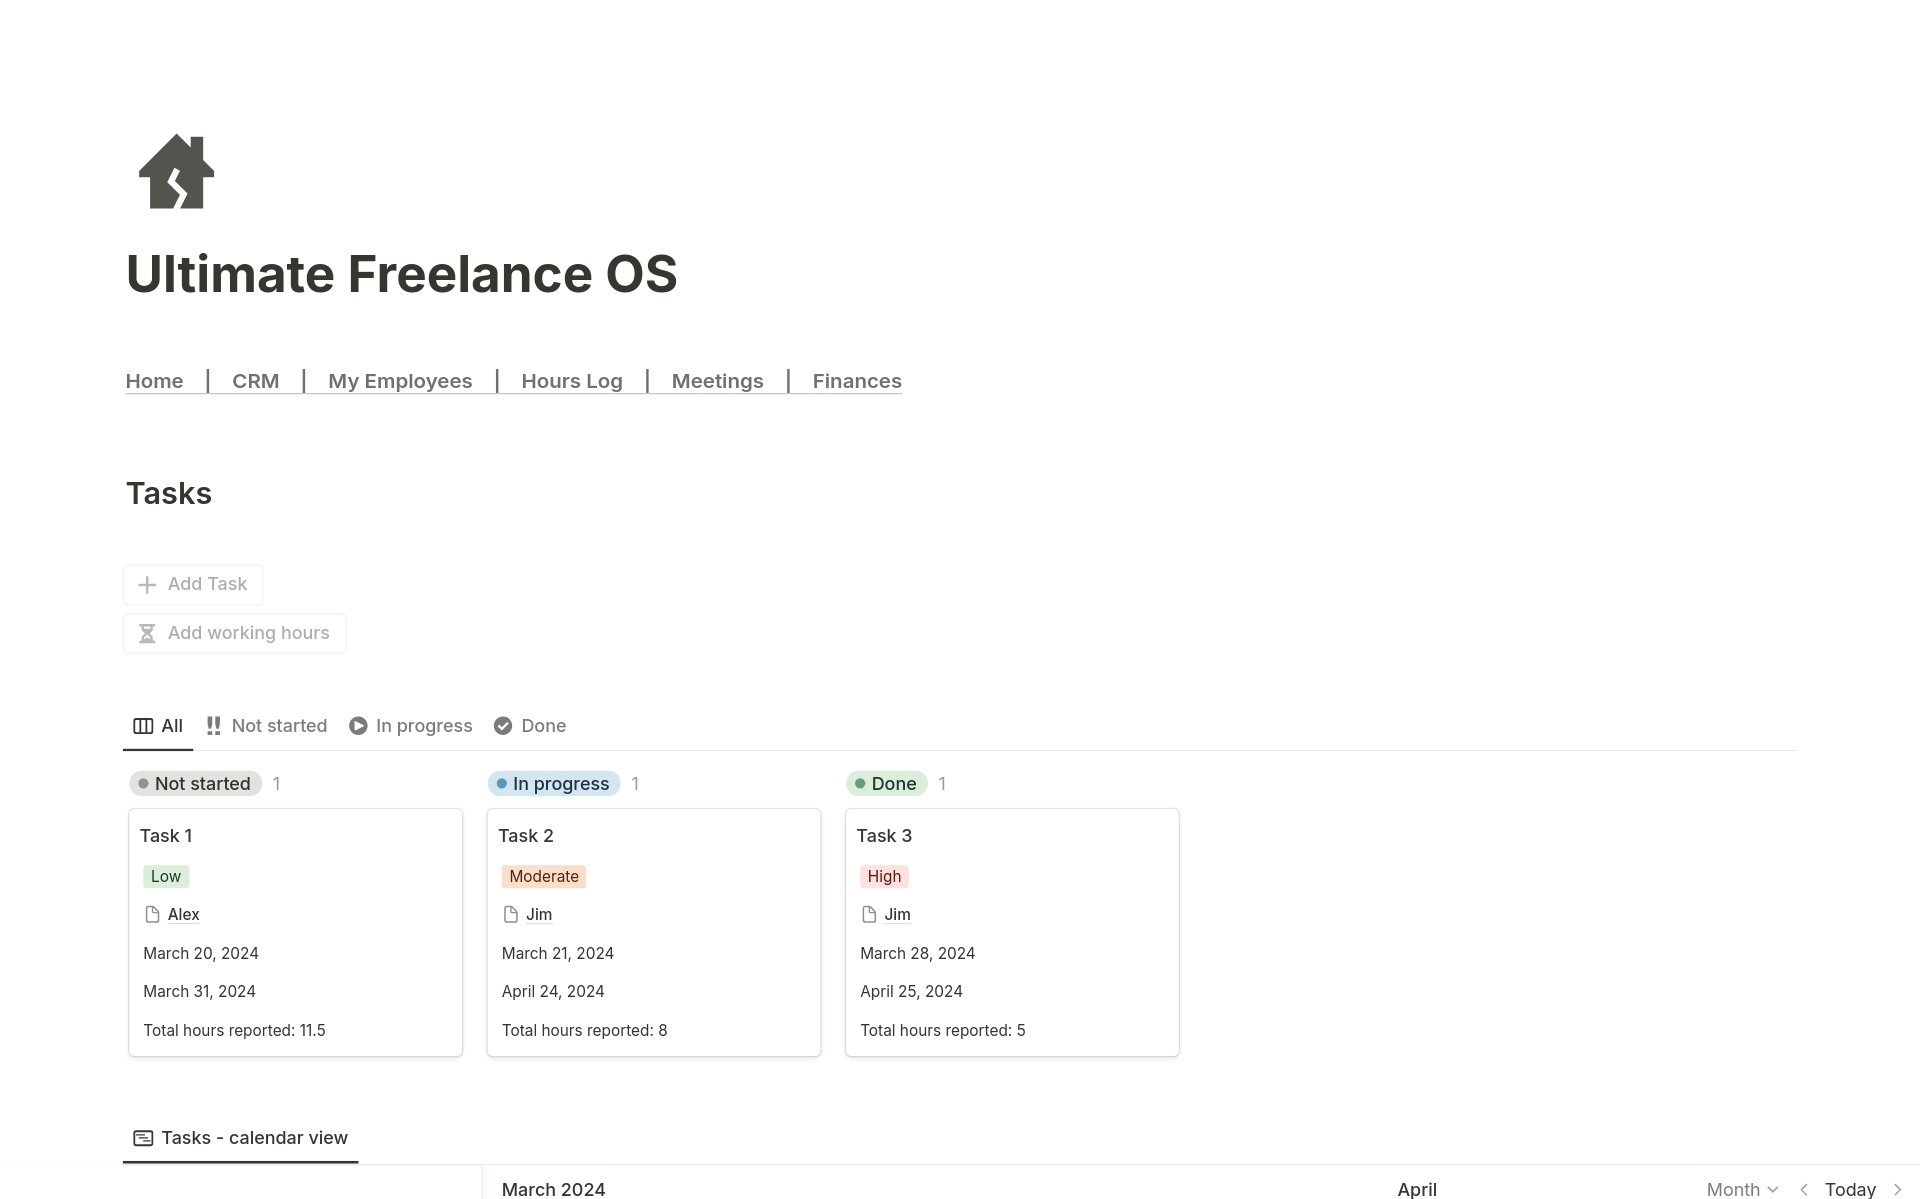 Tired of juggling multiple tools for project management, sales, and team communication?
Ultimate Freelance OS is a powerful yet easy-to-use CRM that helps you manage everything in one place.